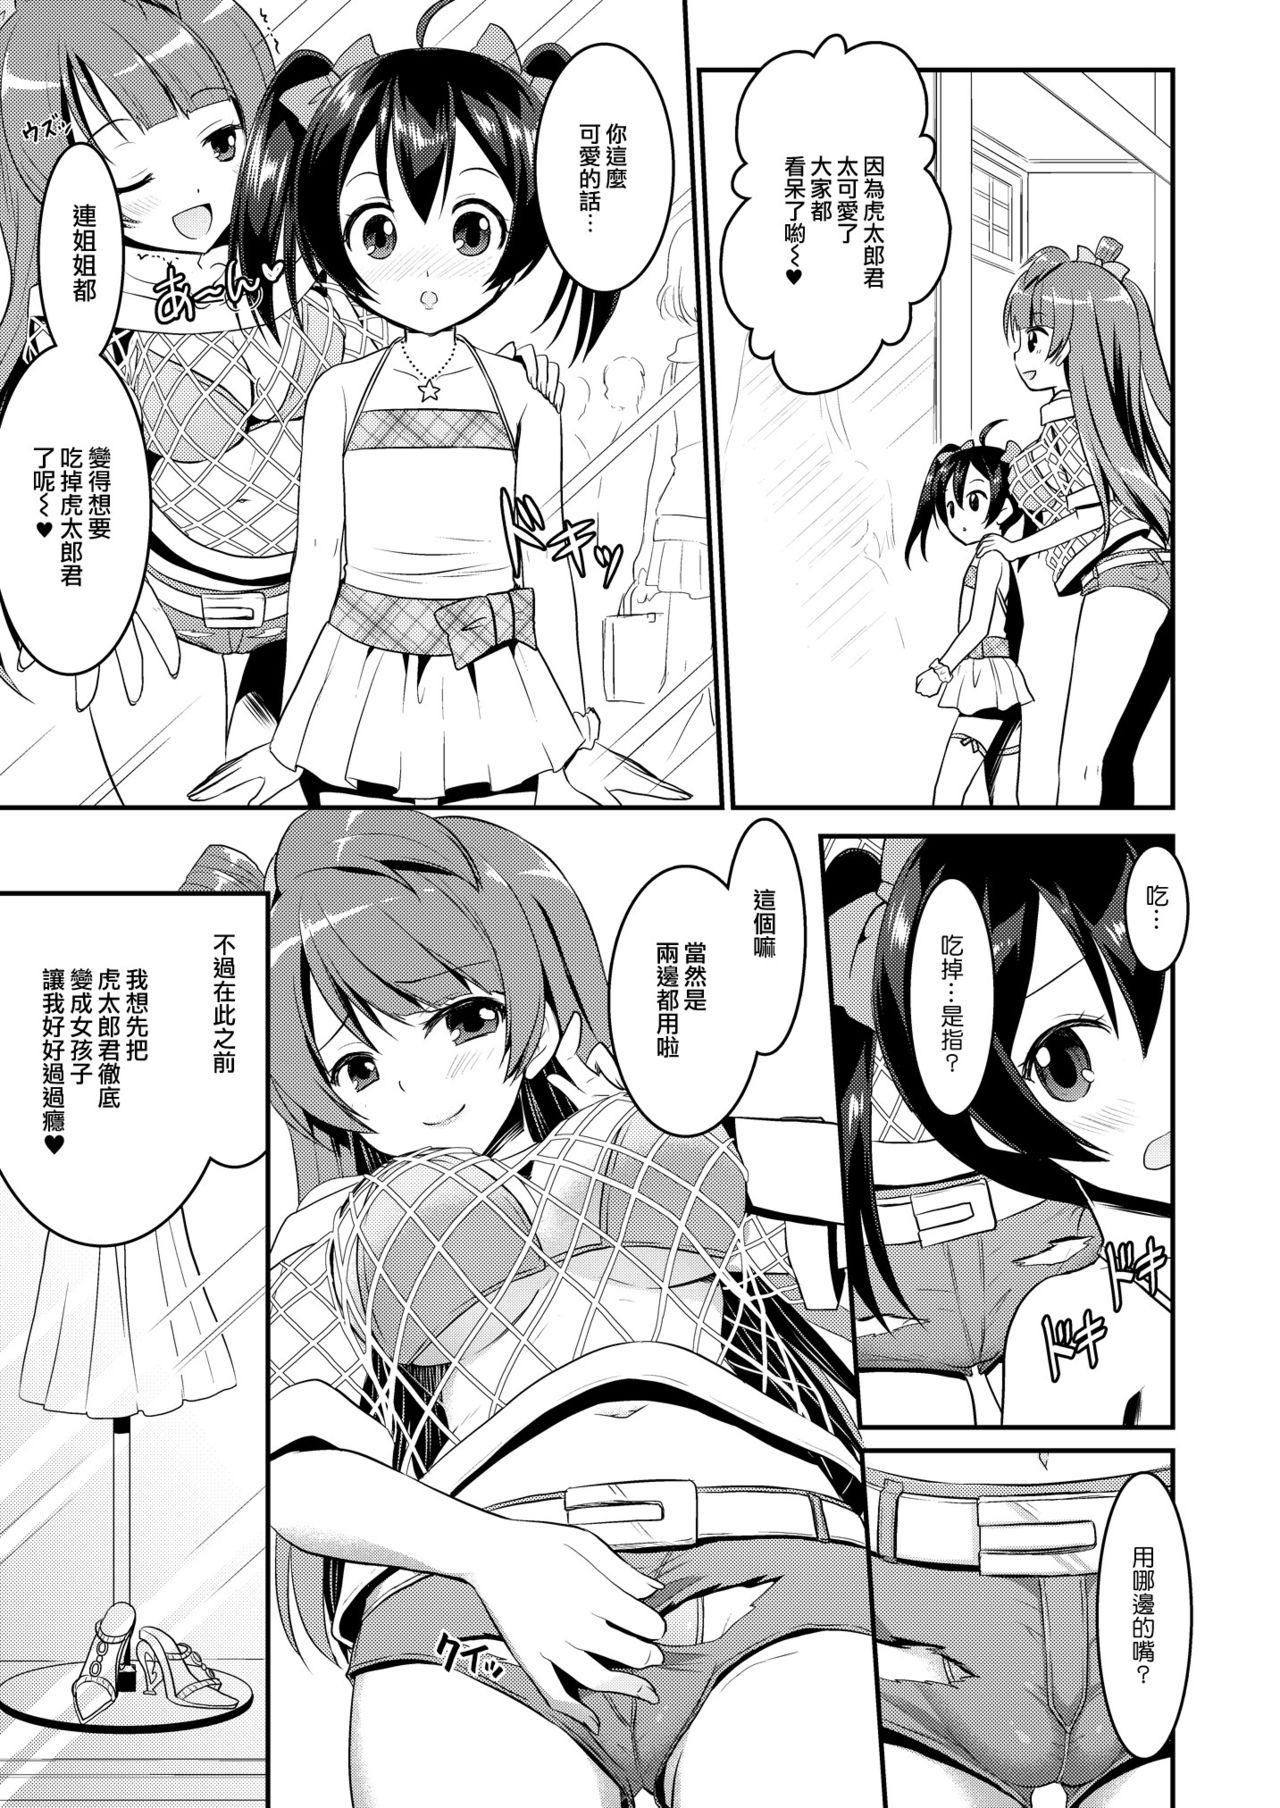 Porra Eat Meat Girl 4 - Love live Analsex - Page 9